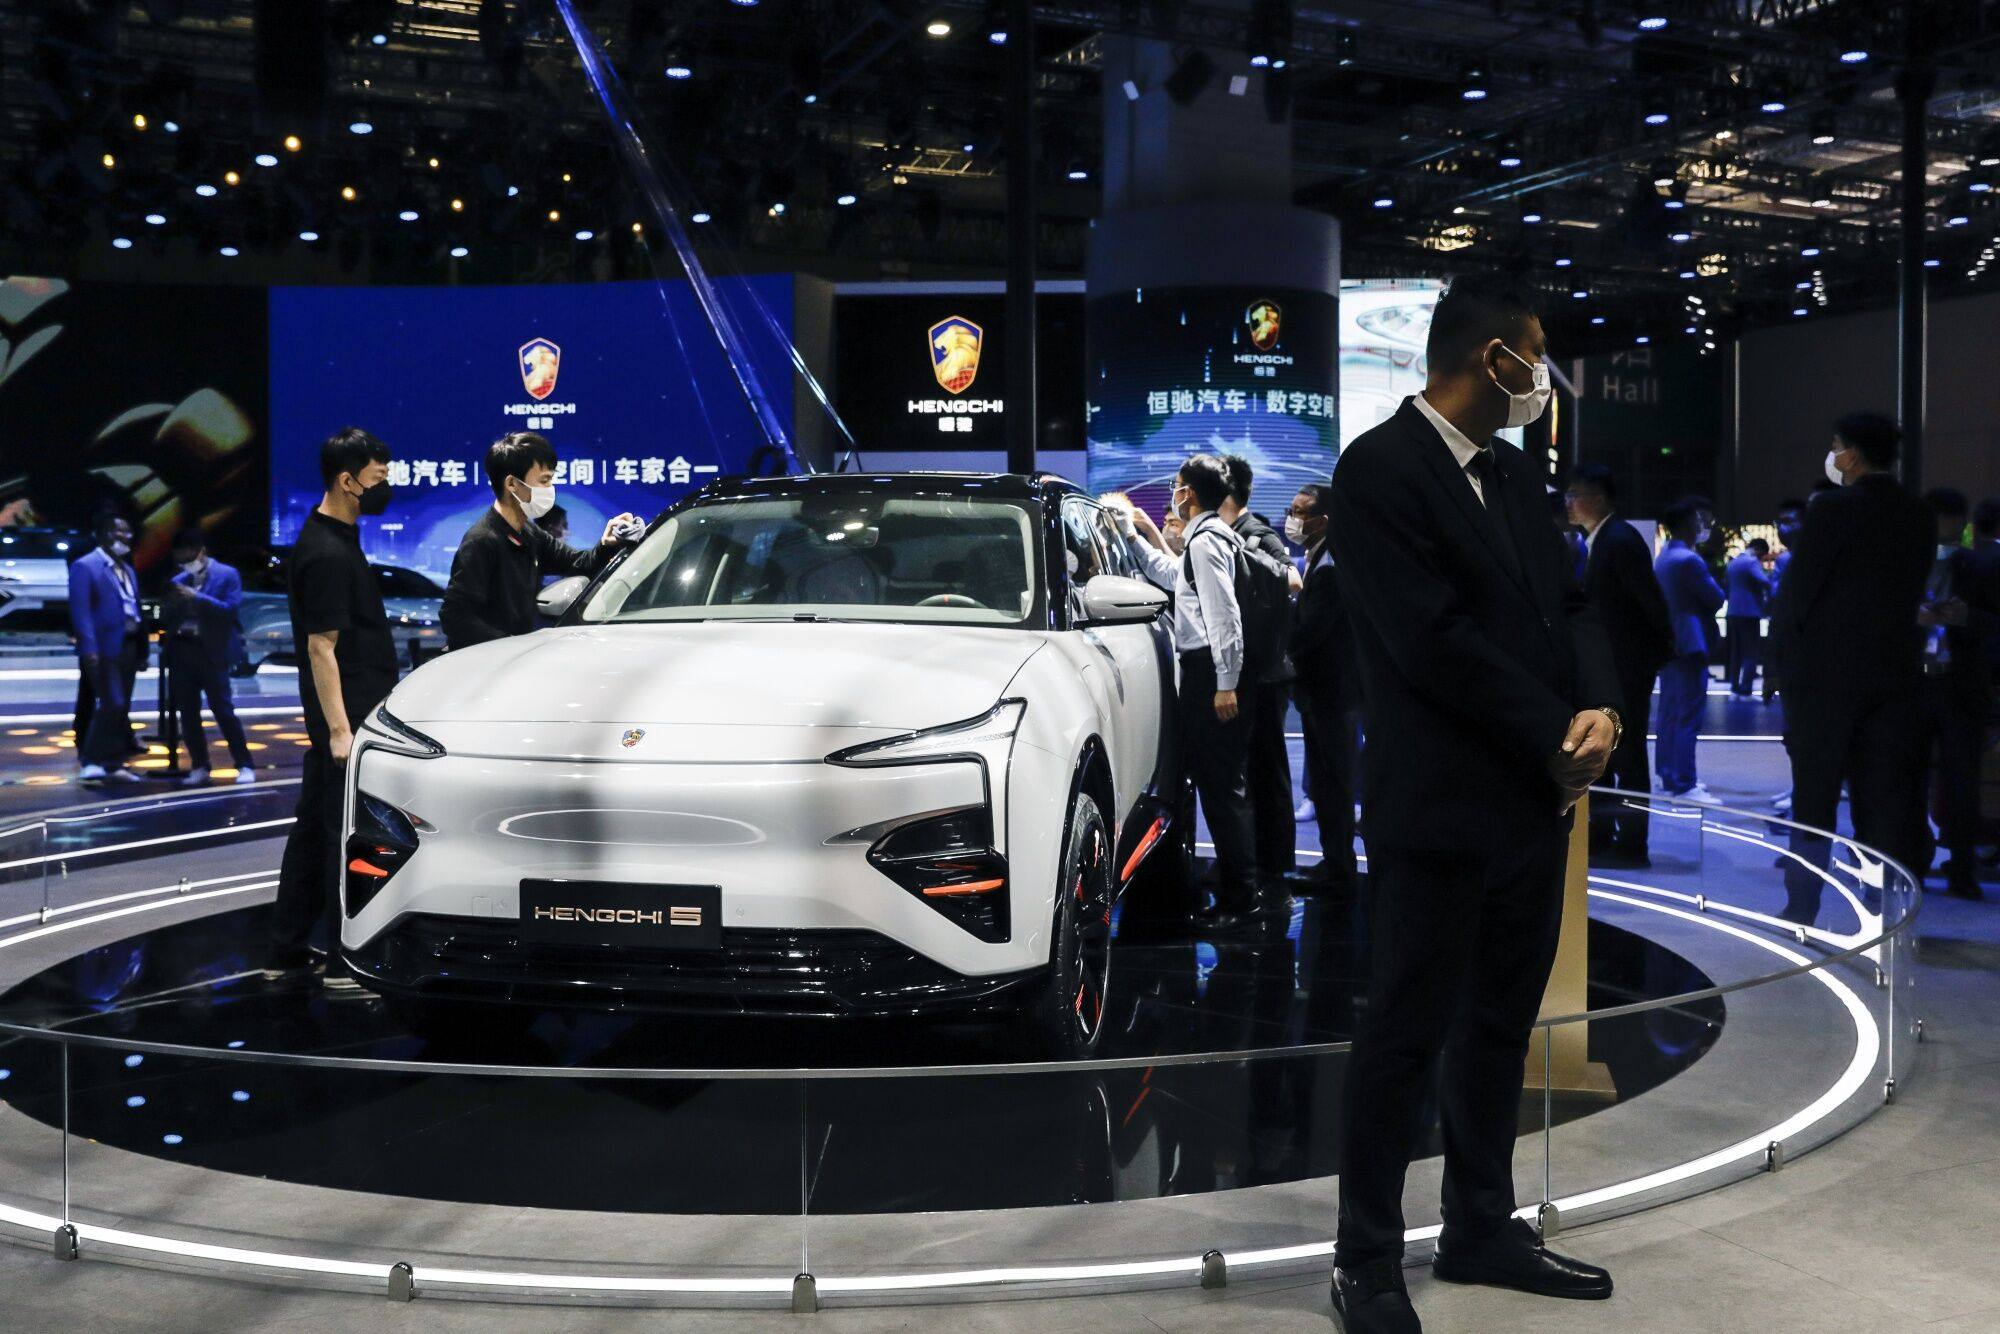 Workers make final touches to an Evergrande NEV Hengchi 1 electric vehicle at the Auto show in Shanghai, April 2021. Photo: Bloomberg